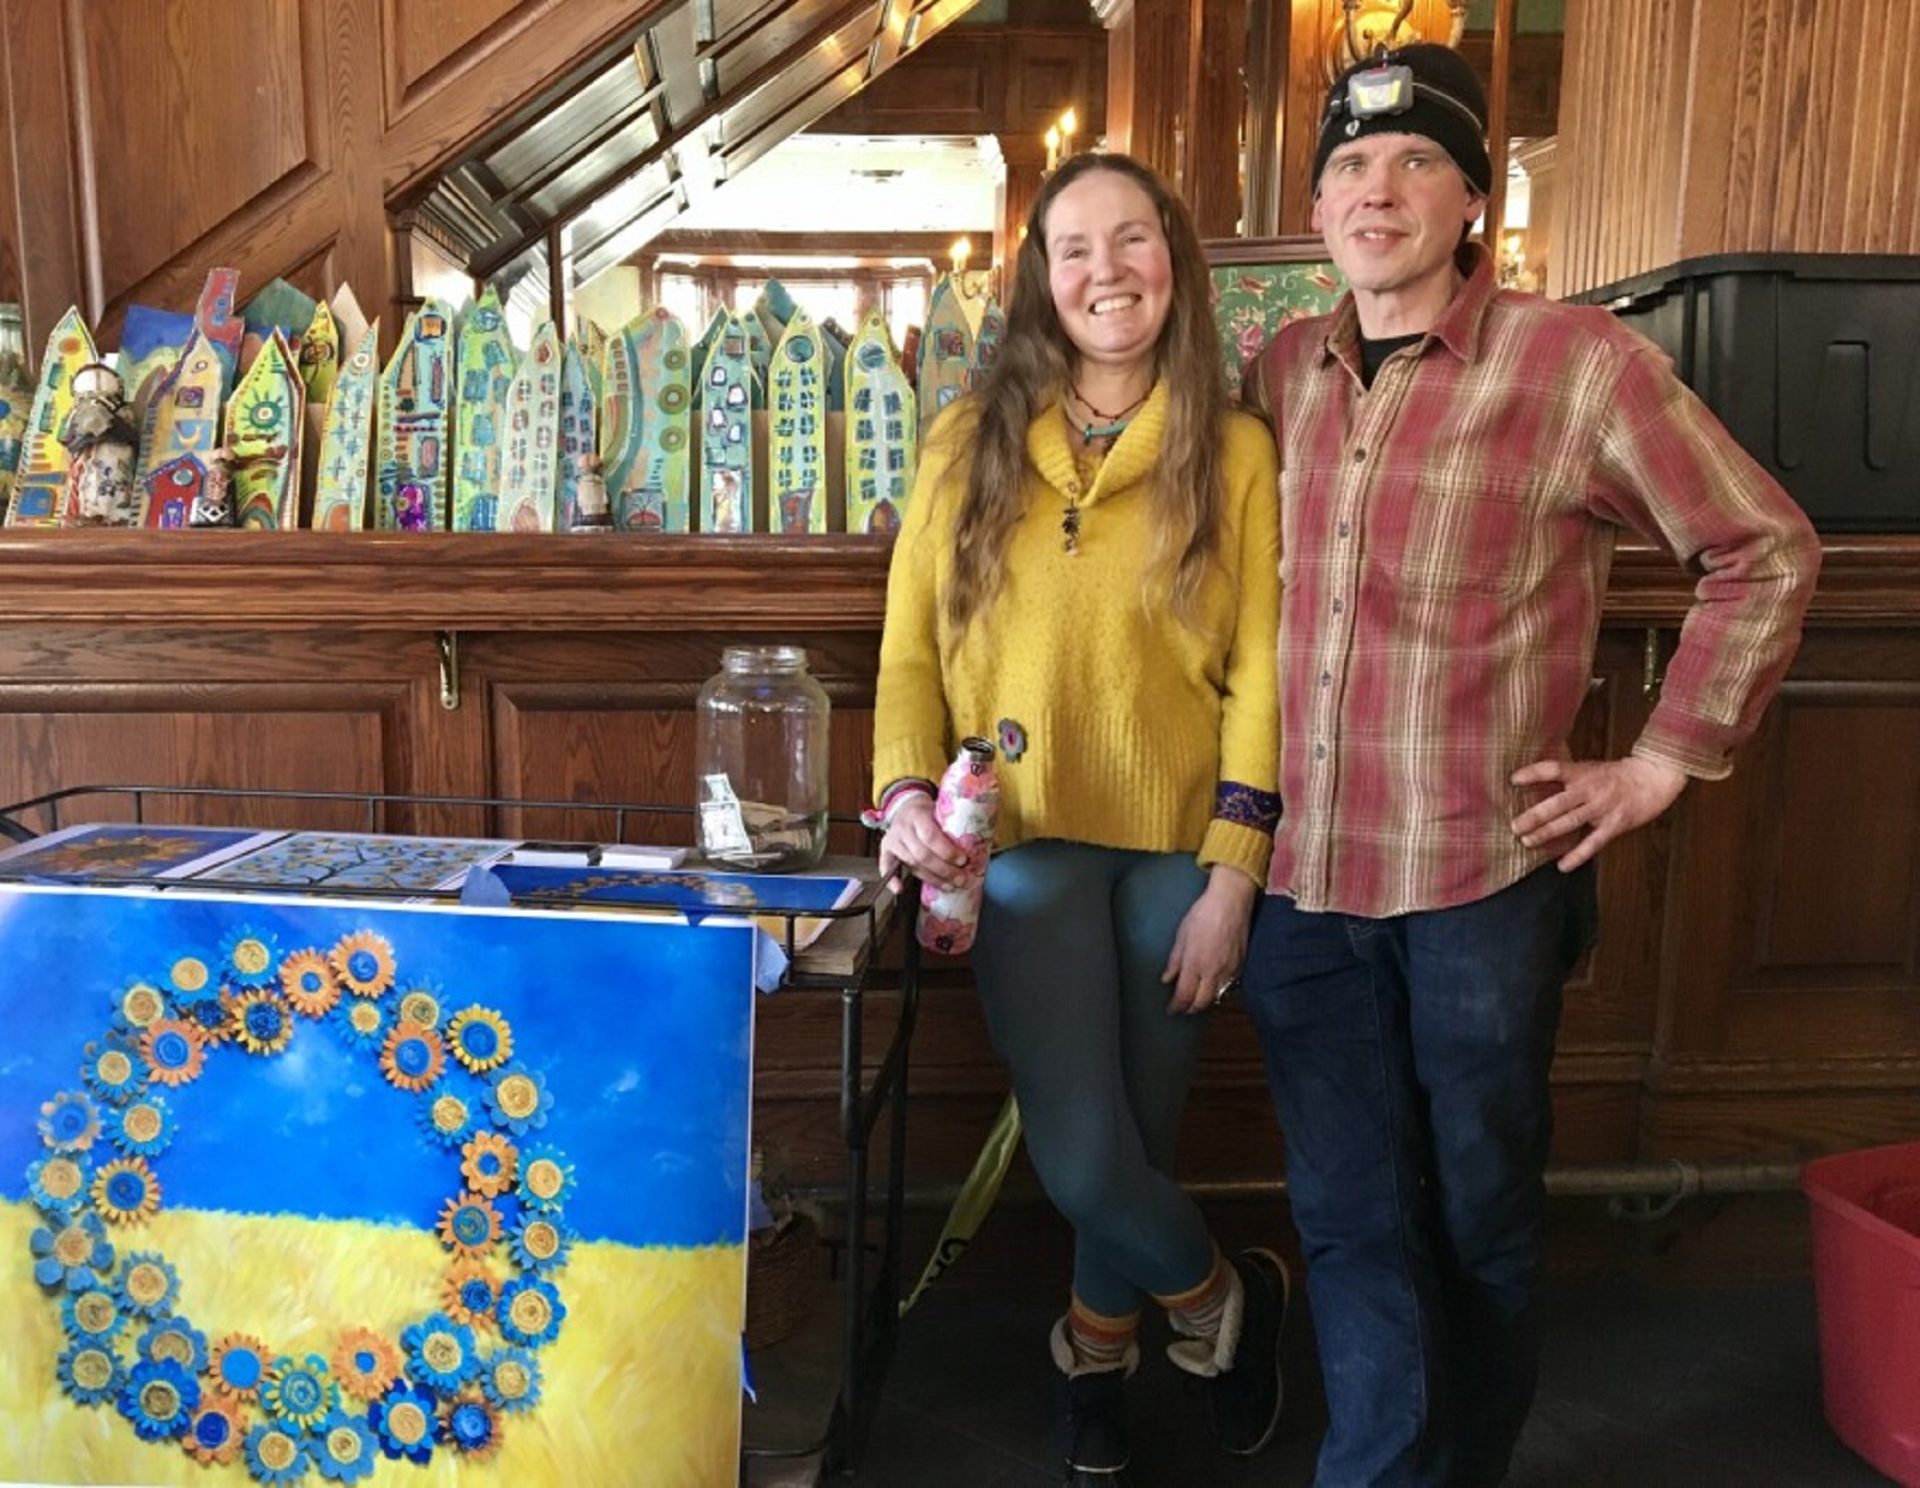 Olga and John Snyder, of Coudersport, have been working to support Ukrainians, where Olga is originally from, even as they dealt with a fire in their downtown business. They have been collecting donations for prints of the painting Olga made representing Ukraine's flag and national flower, the sunflower.